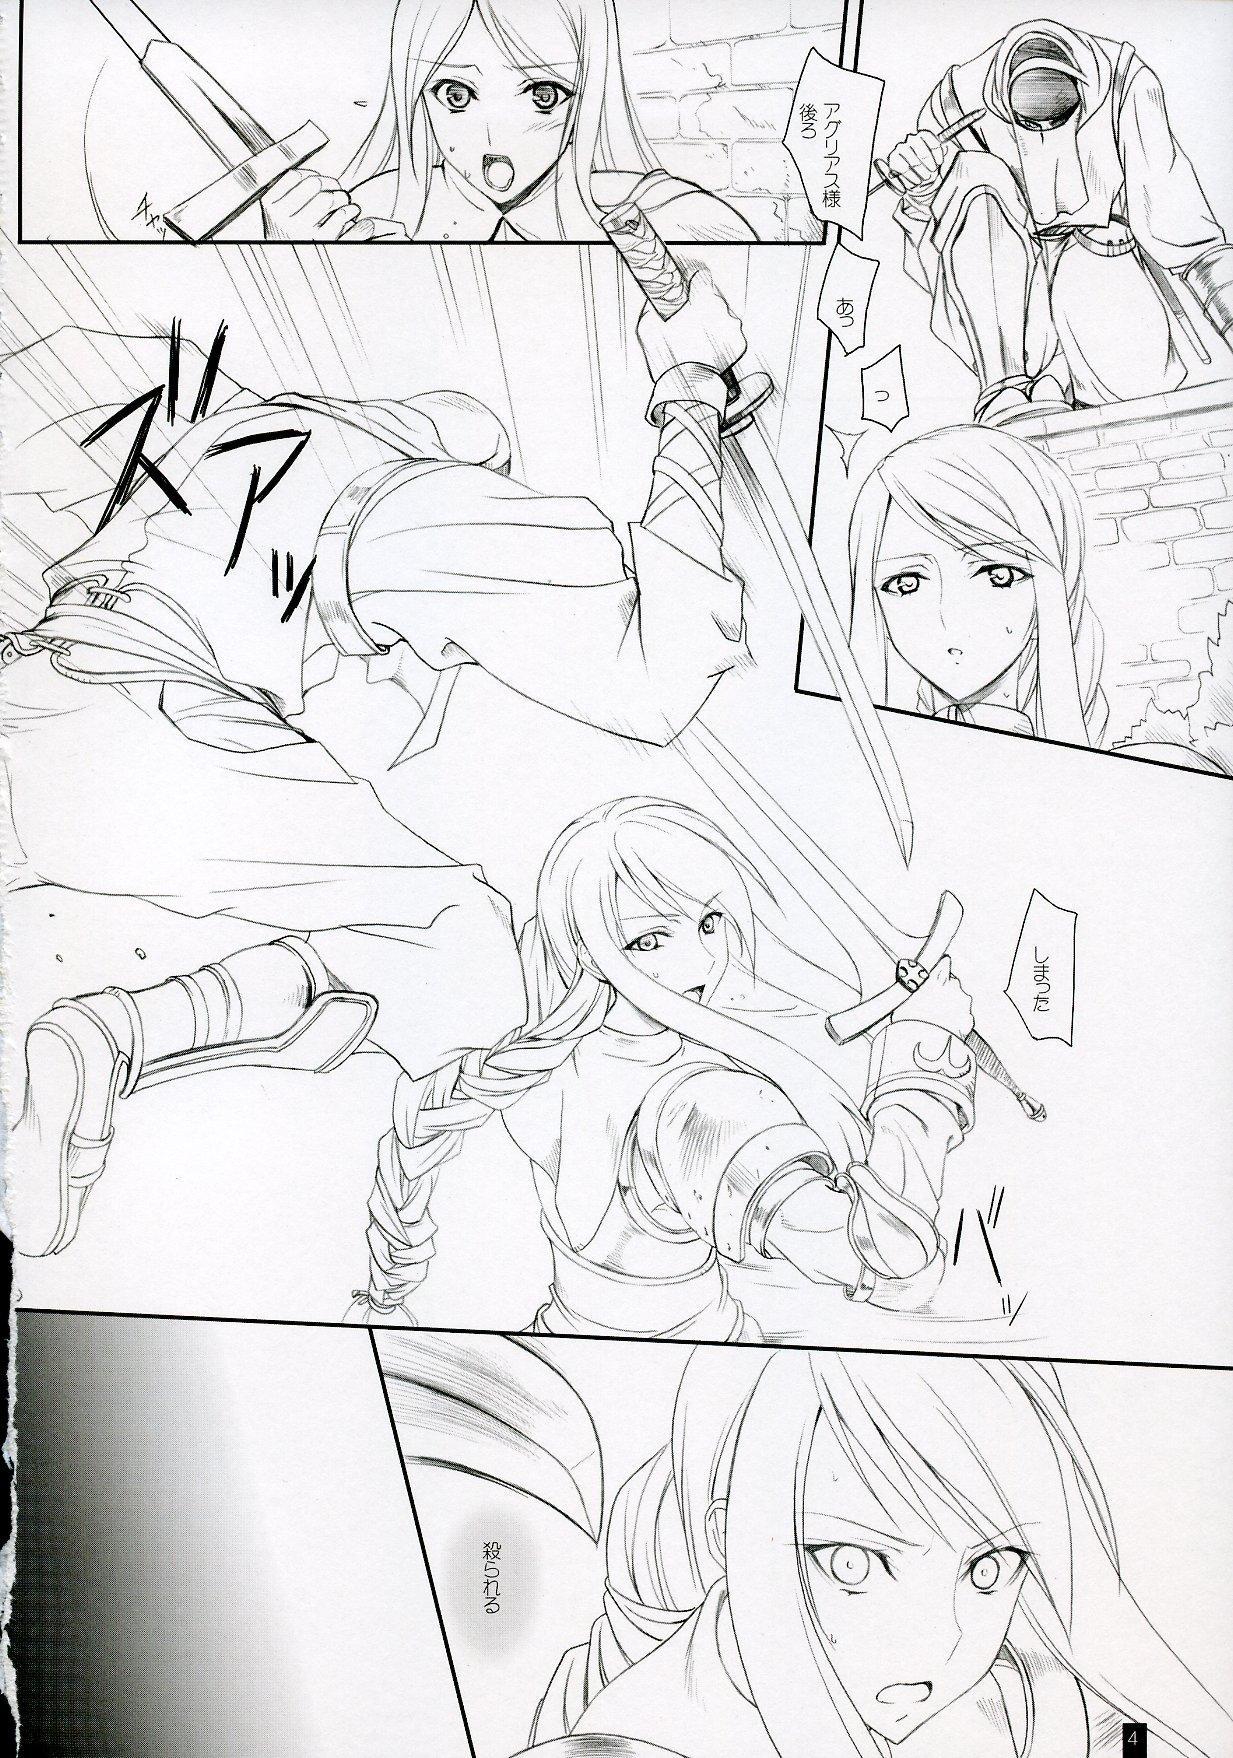 No Condom Agrias-san to love love lesson - Final fantasy tactics Shower - Page 3